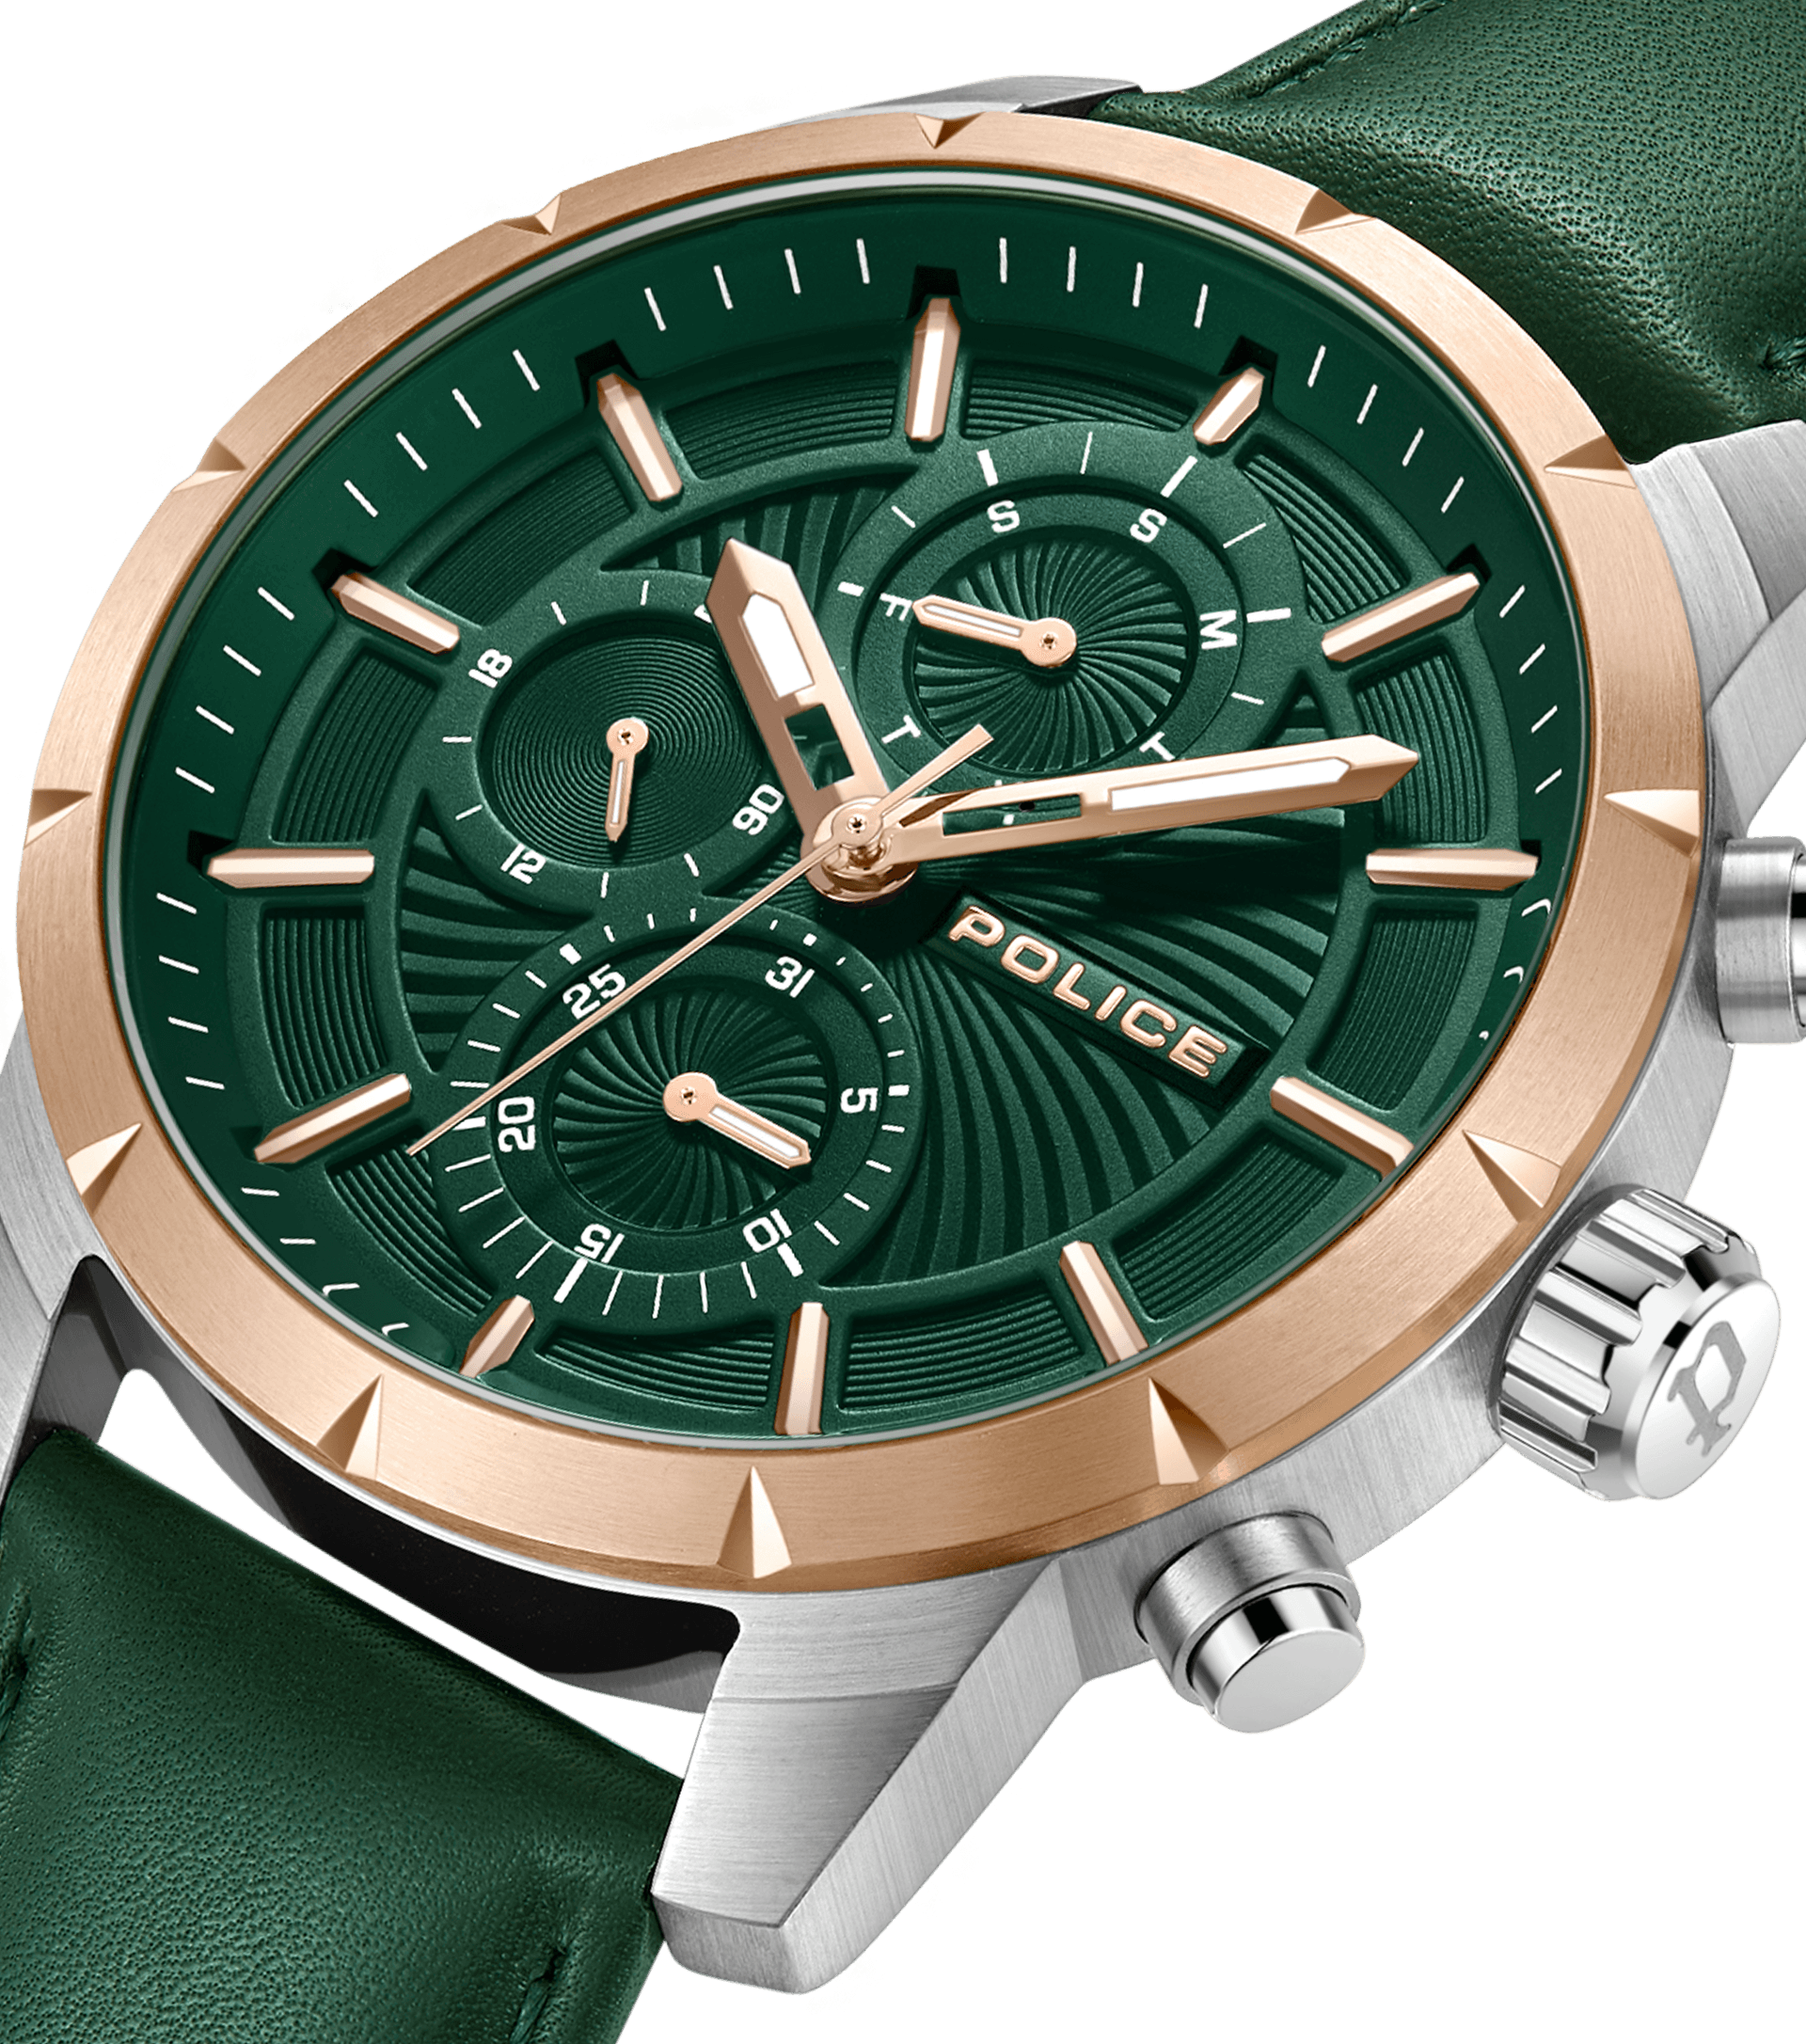 Men - For Neist Watch Silverandrosegold watches By Police Police Green,